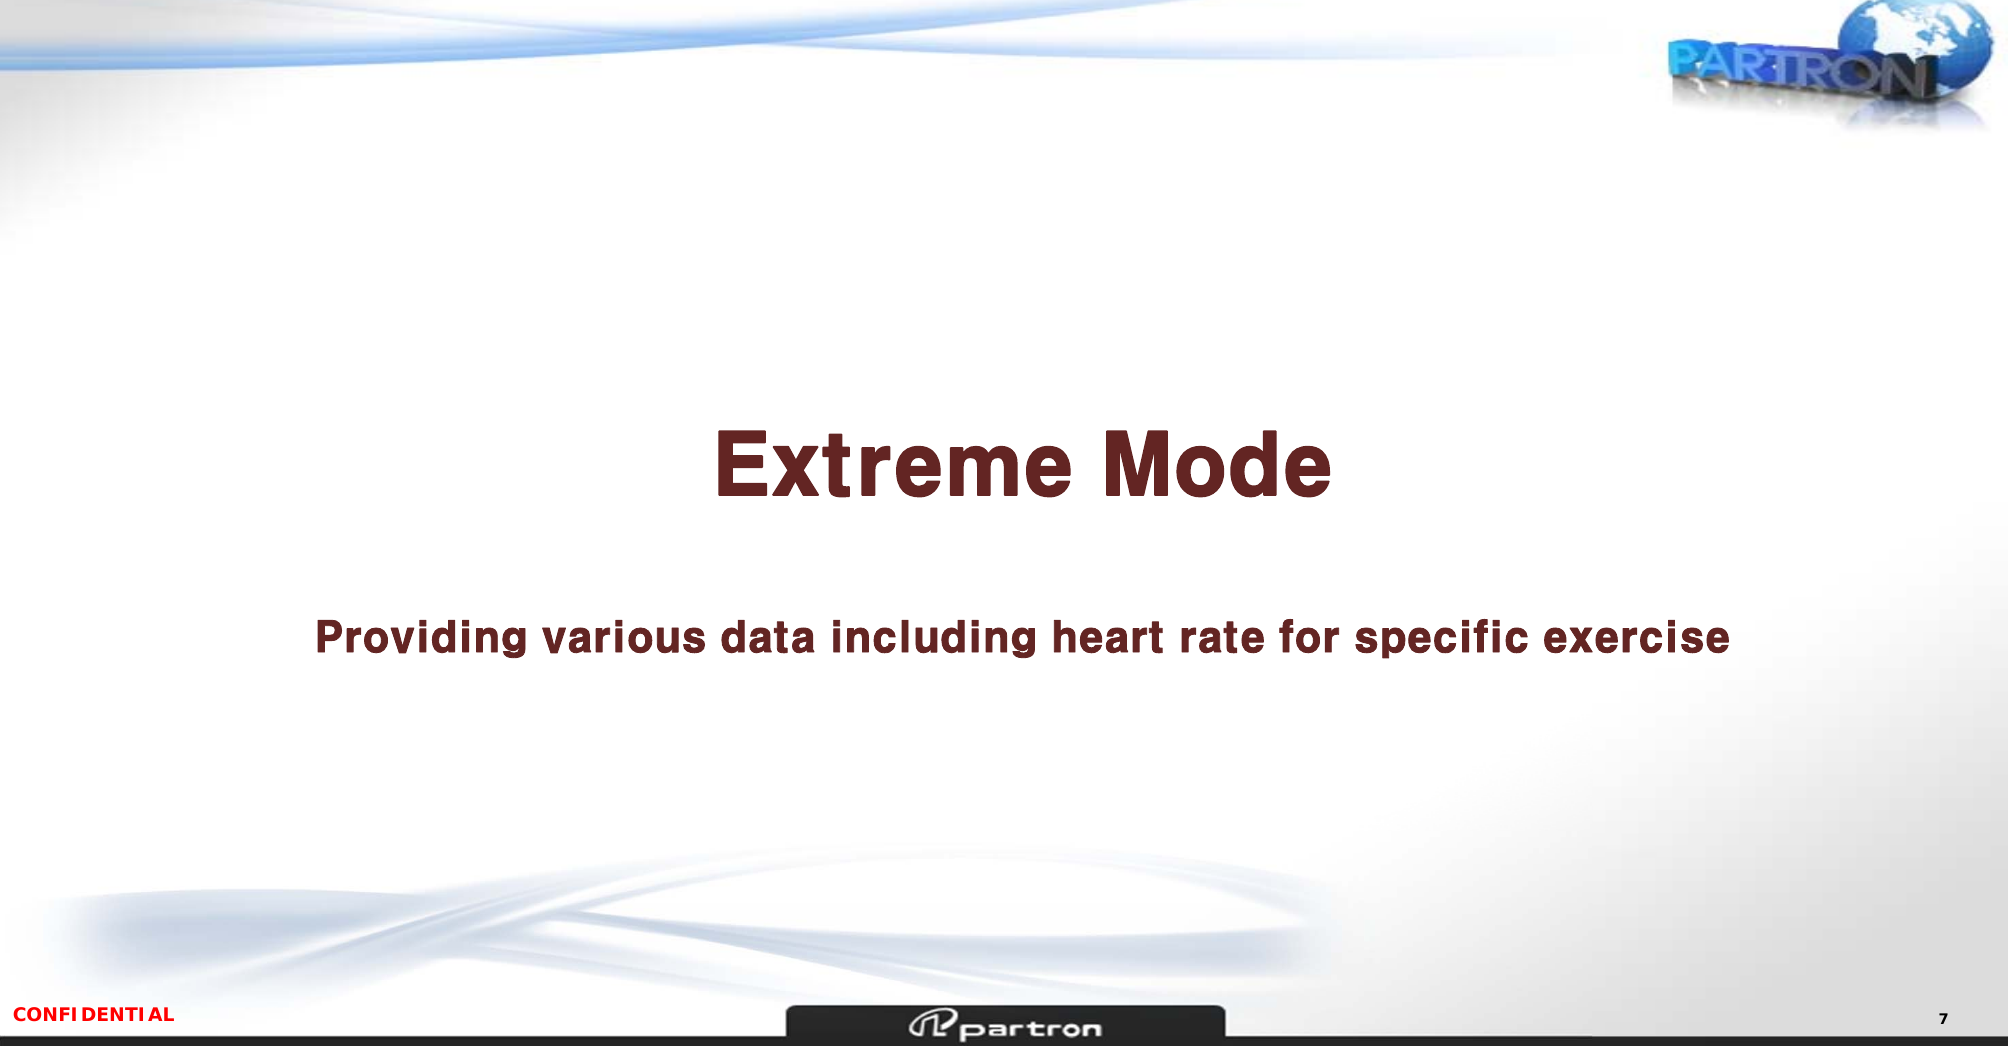 CONFIDENTIAL 7Extreme ModeProviding various data including heart rate for specific exercise